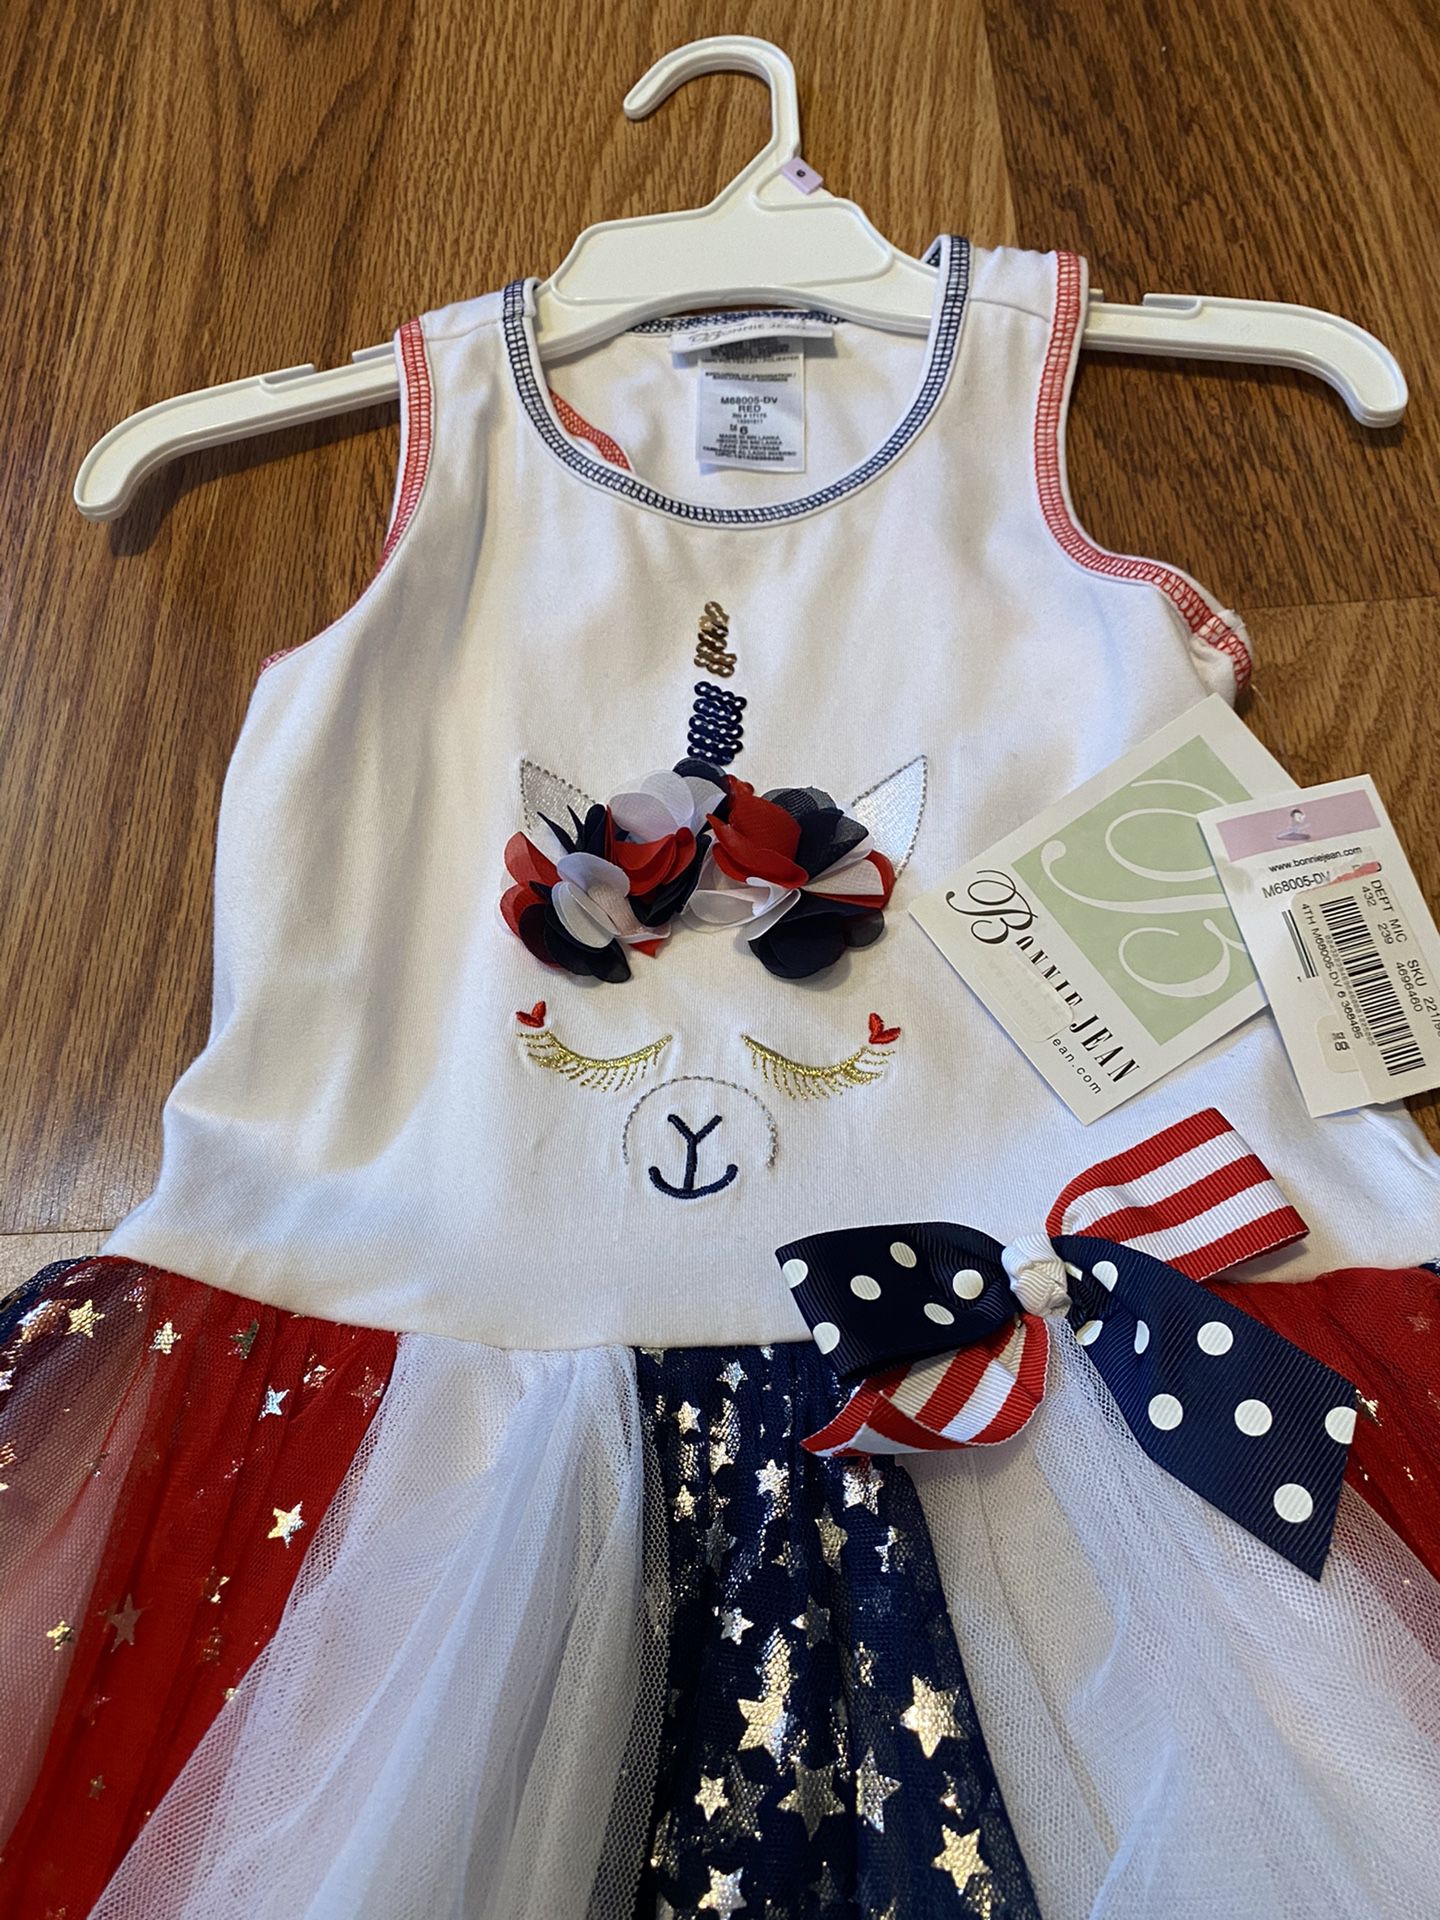 New Bonnie and Jean sleeveless Red, White and blue girls sz6 dress with lace and stars.